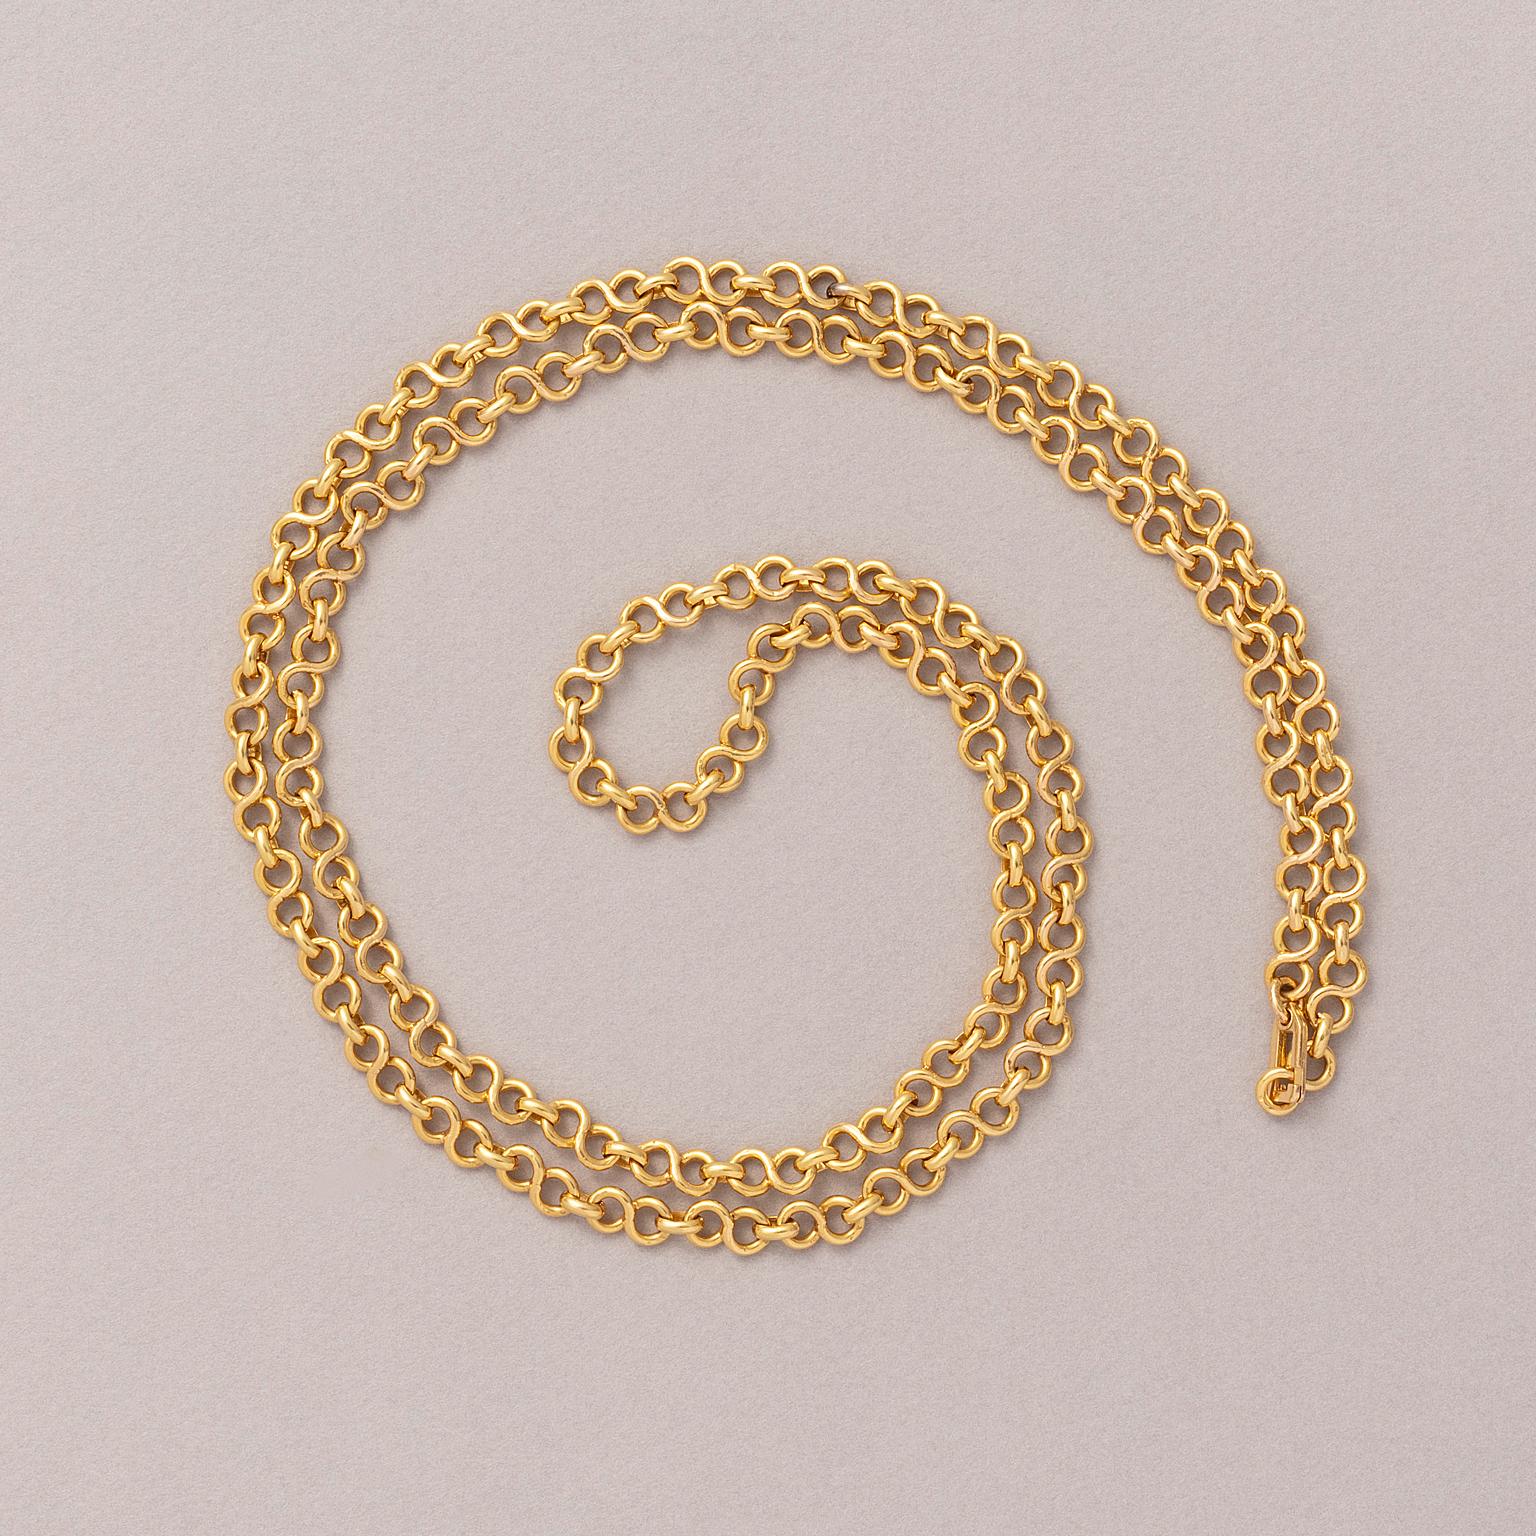 An 18 carat long chain with infinity links.

weight: 68.45 grams
length: 87 cm